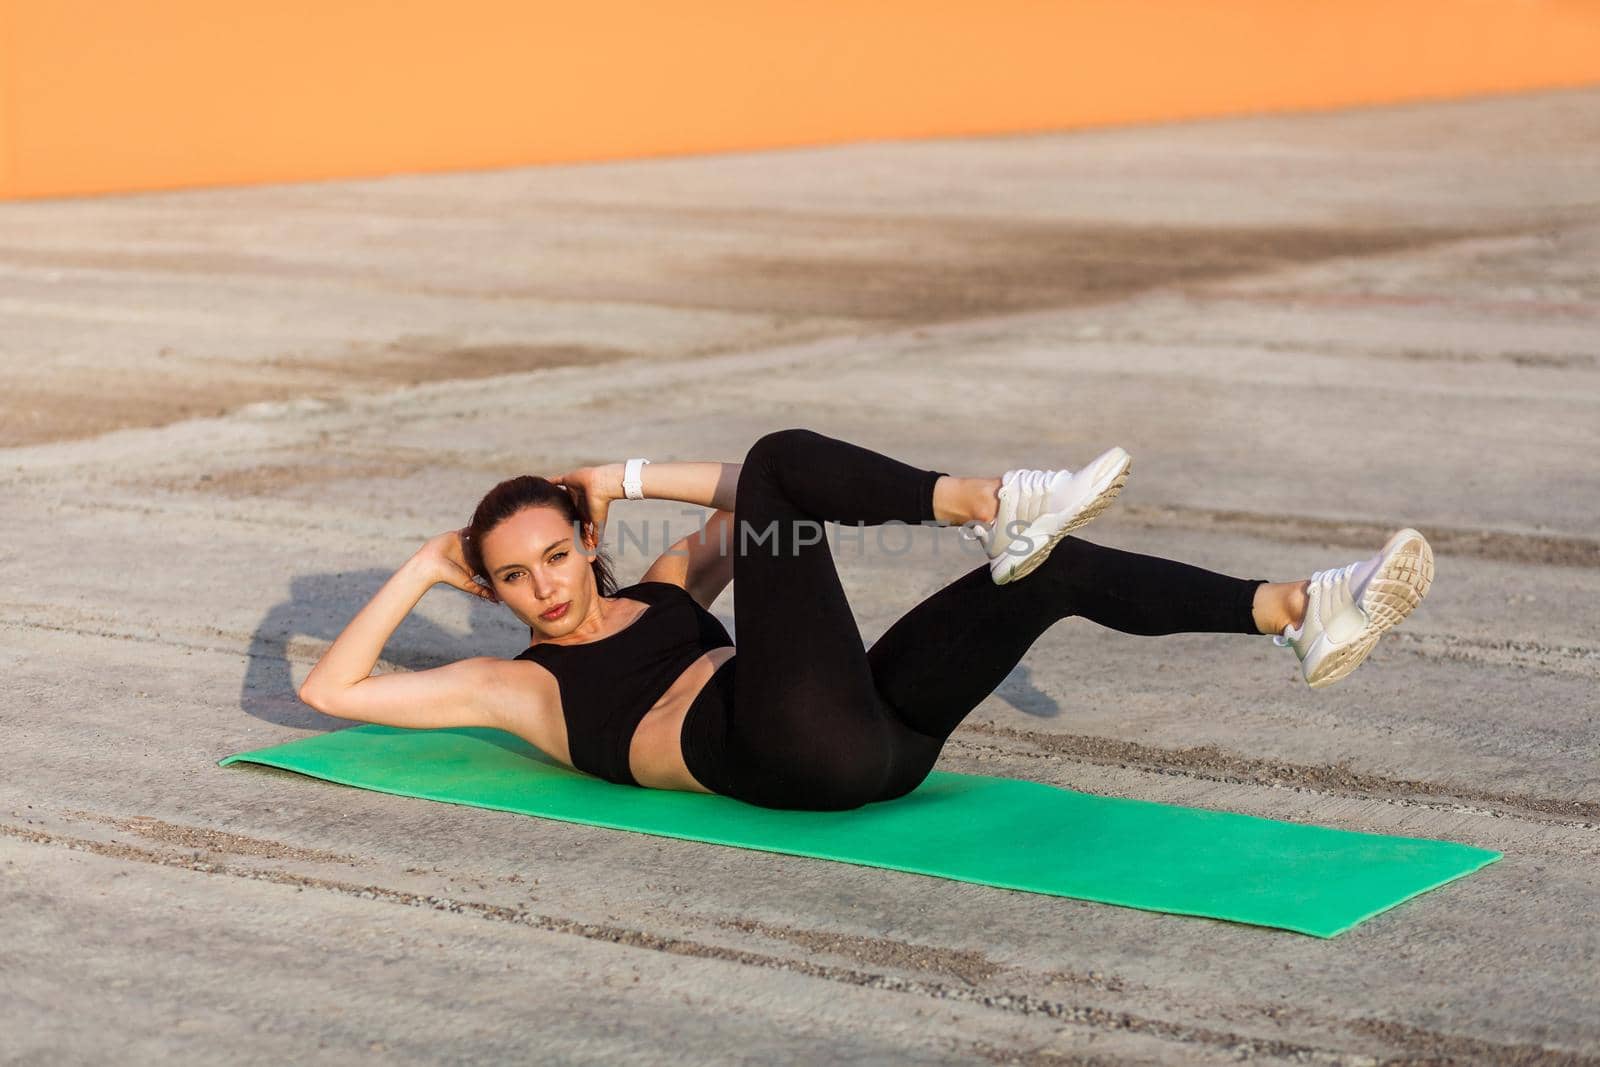 Fit sporty beautiful girl in tight sportswear, black pants and top, lying on mat doing sit ups, crunch exercise, training abdominal muscles. Health care and weight loss concept, sport activity outdoor